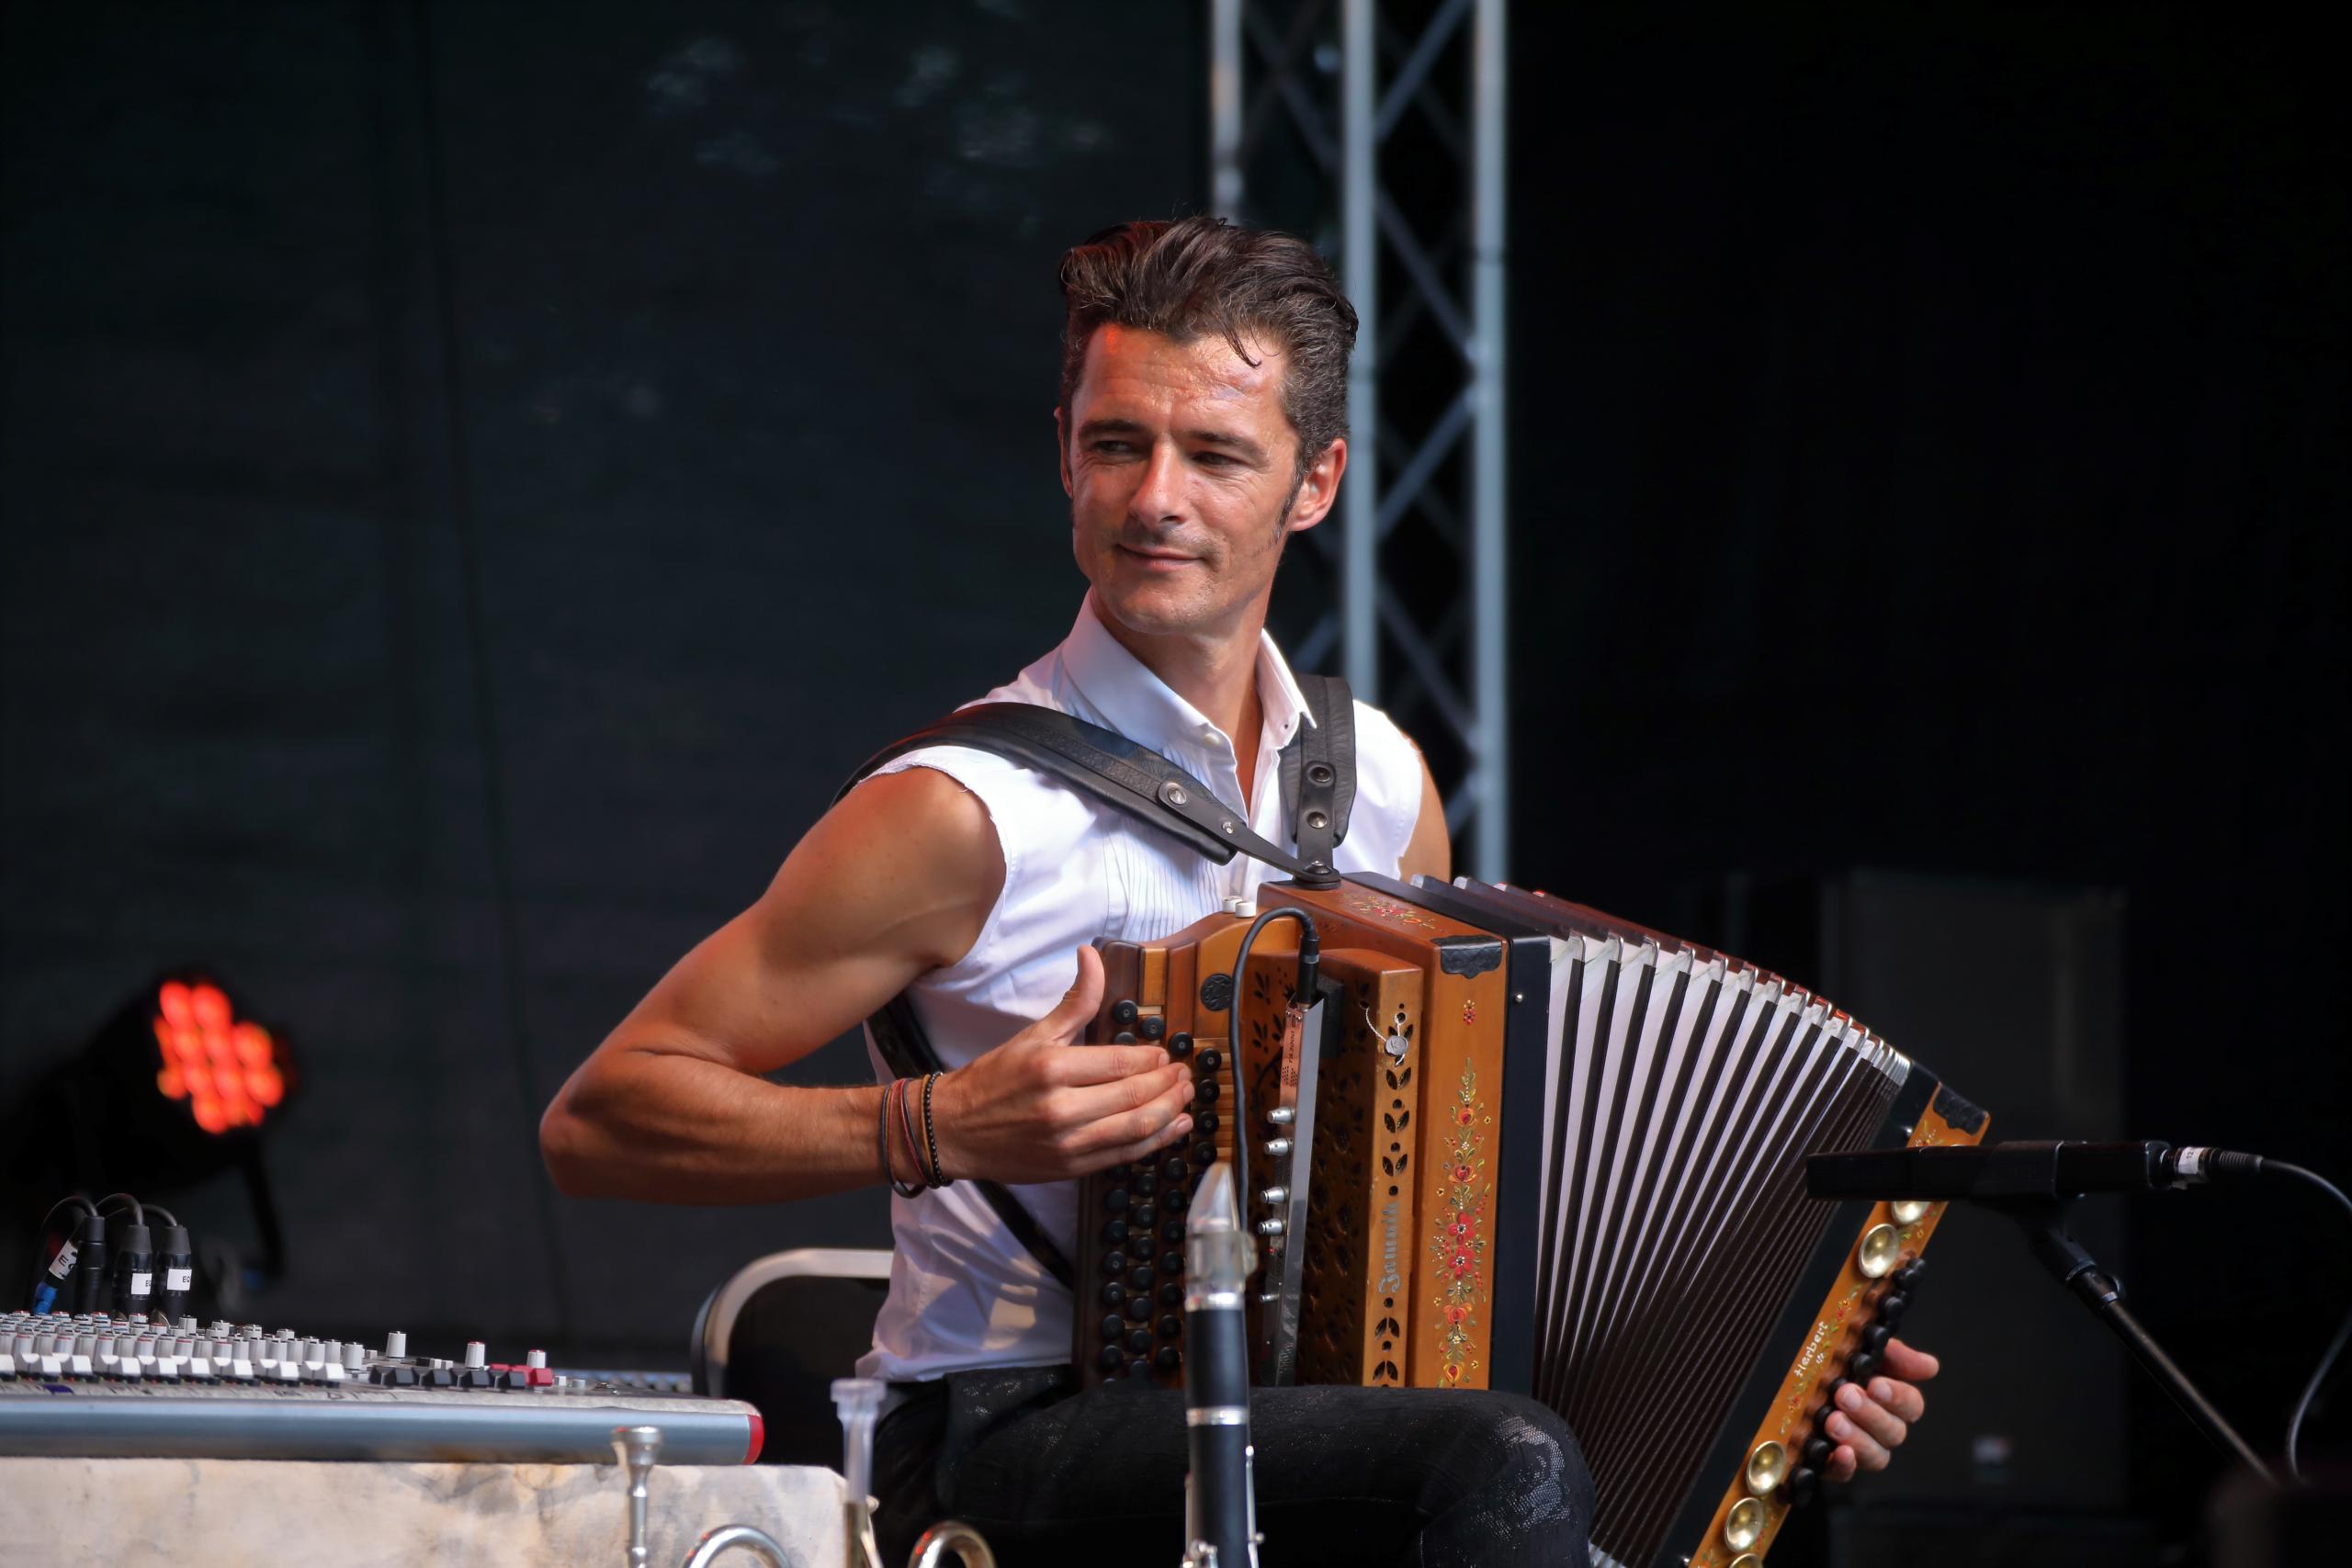 The musician Herbert Pixner with accordion on a stage